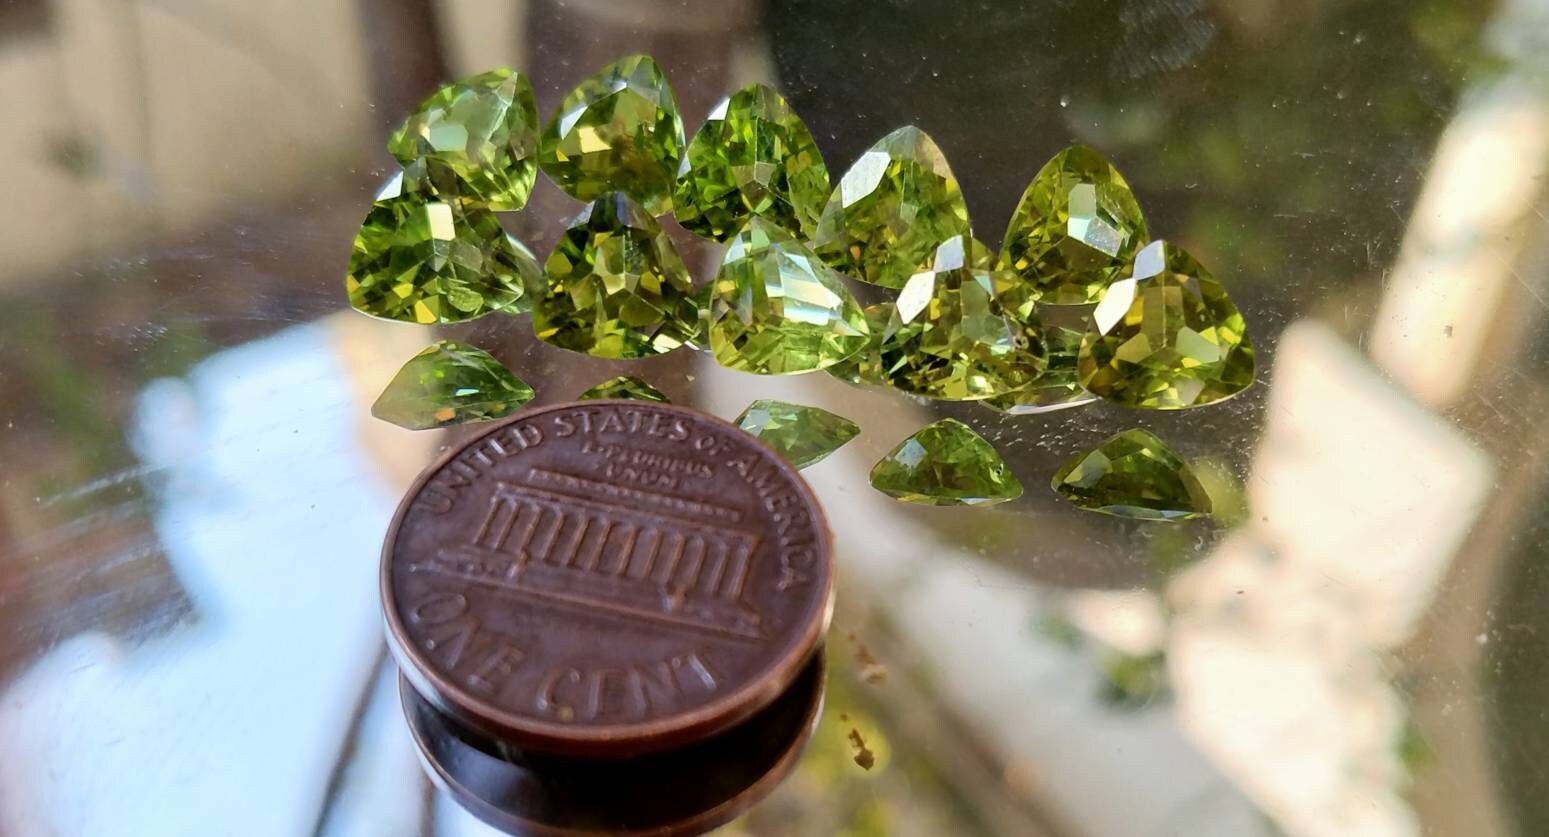 ARSAA GEMS AND MINERALSNatural top quality faceted beautiful trillion shape calibrated green peridot gems - Premium  from ARSAA GEMS AND MINERALS - Just $160.00! Shop now at ARSAA GEMS AND MINERALS